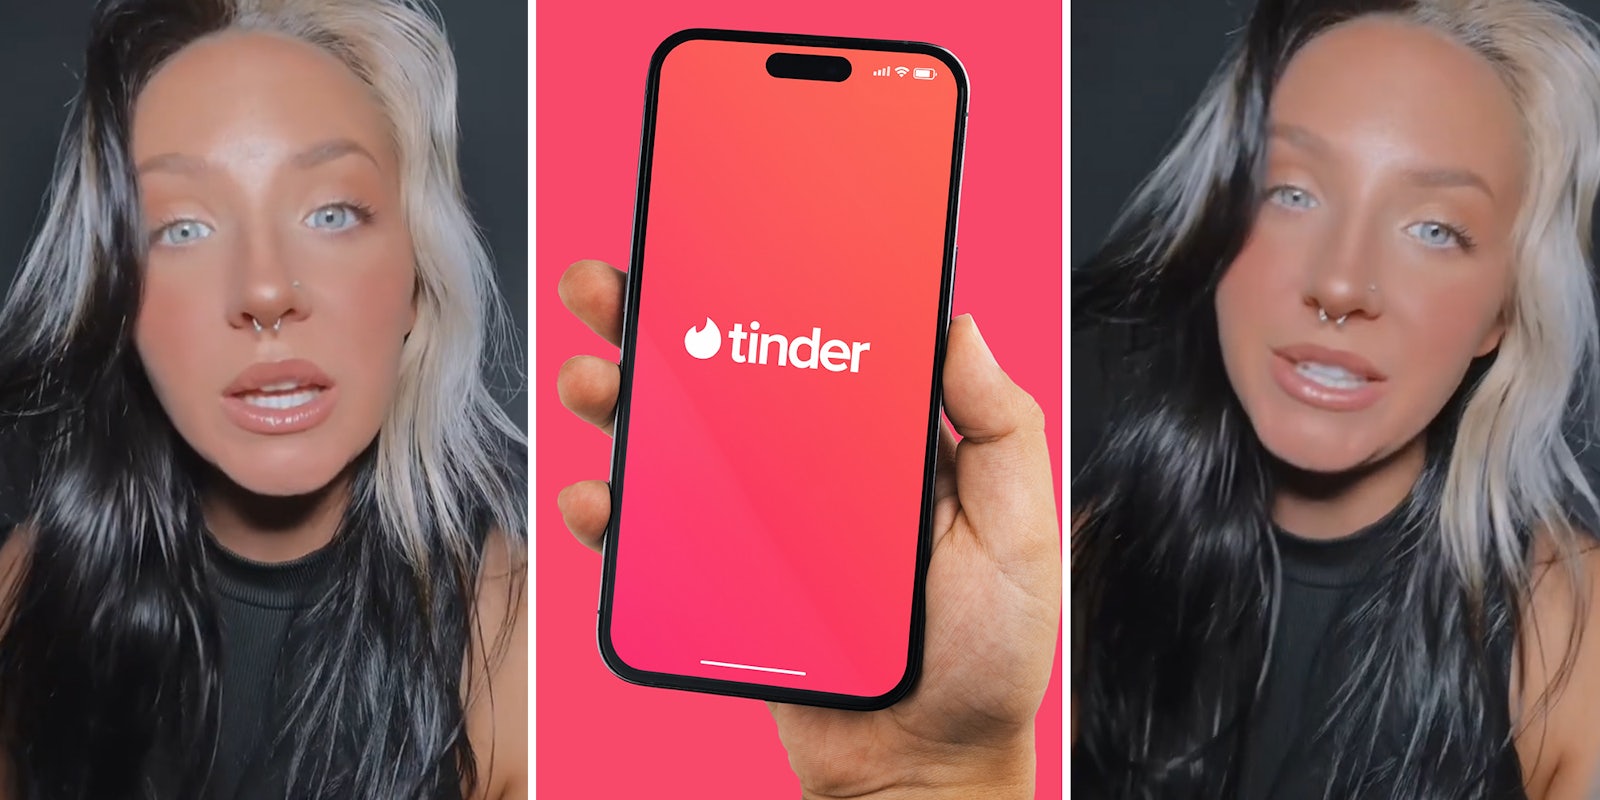 Woman says she was ‘almost kidnapped’ at Tinder date’s house